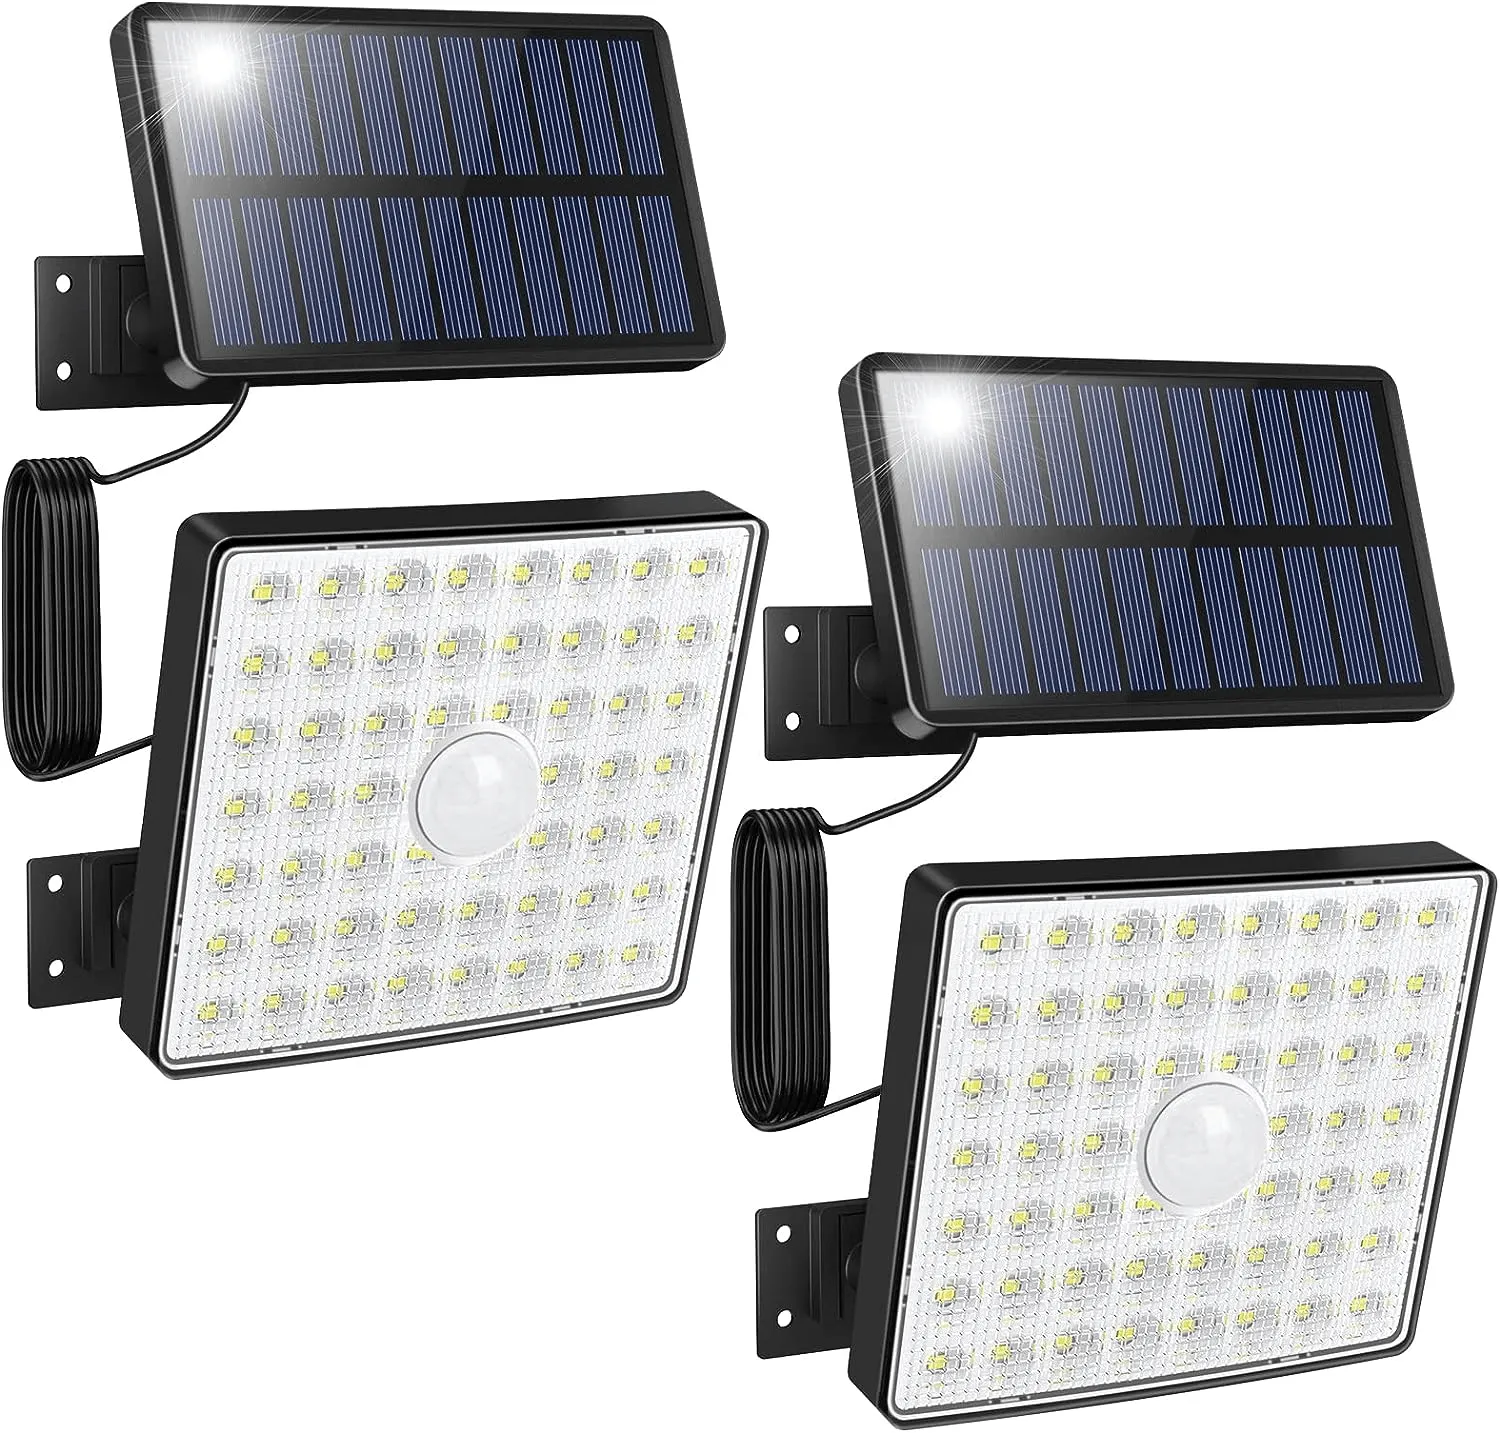 Solar Security Lights Indoor and Outdoor with Motion Sensor